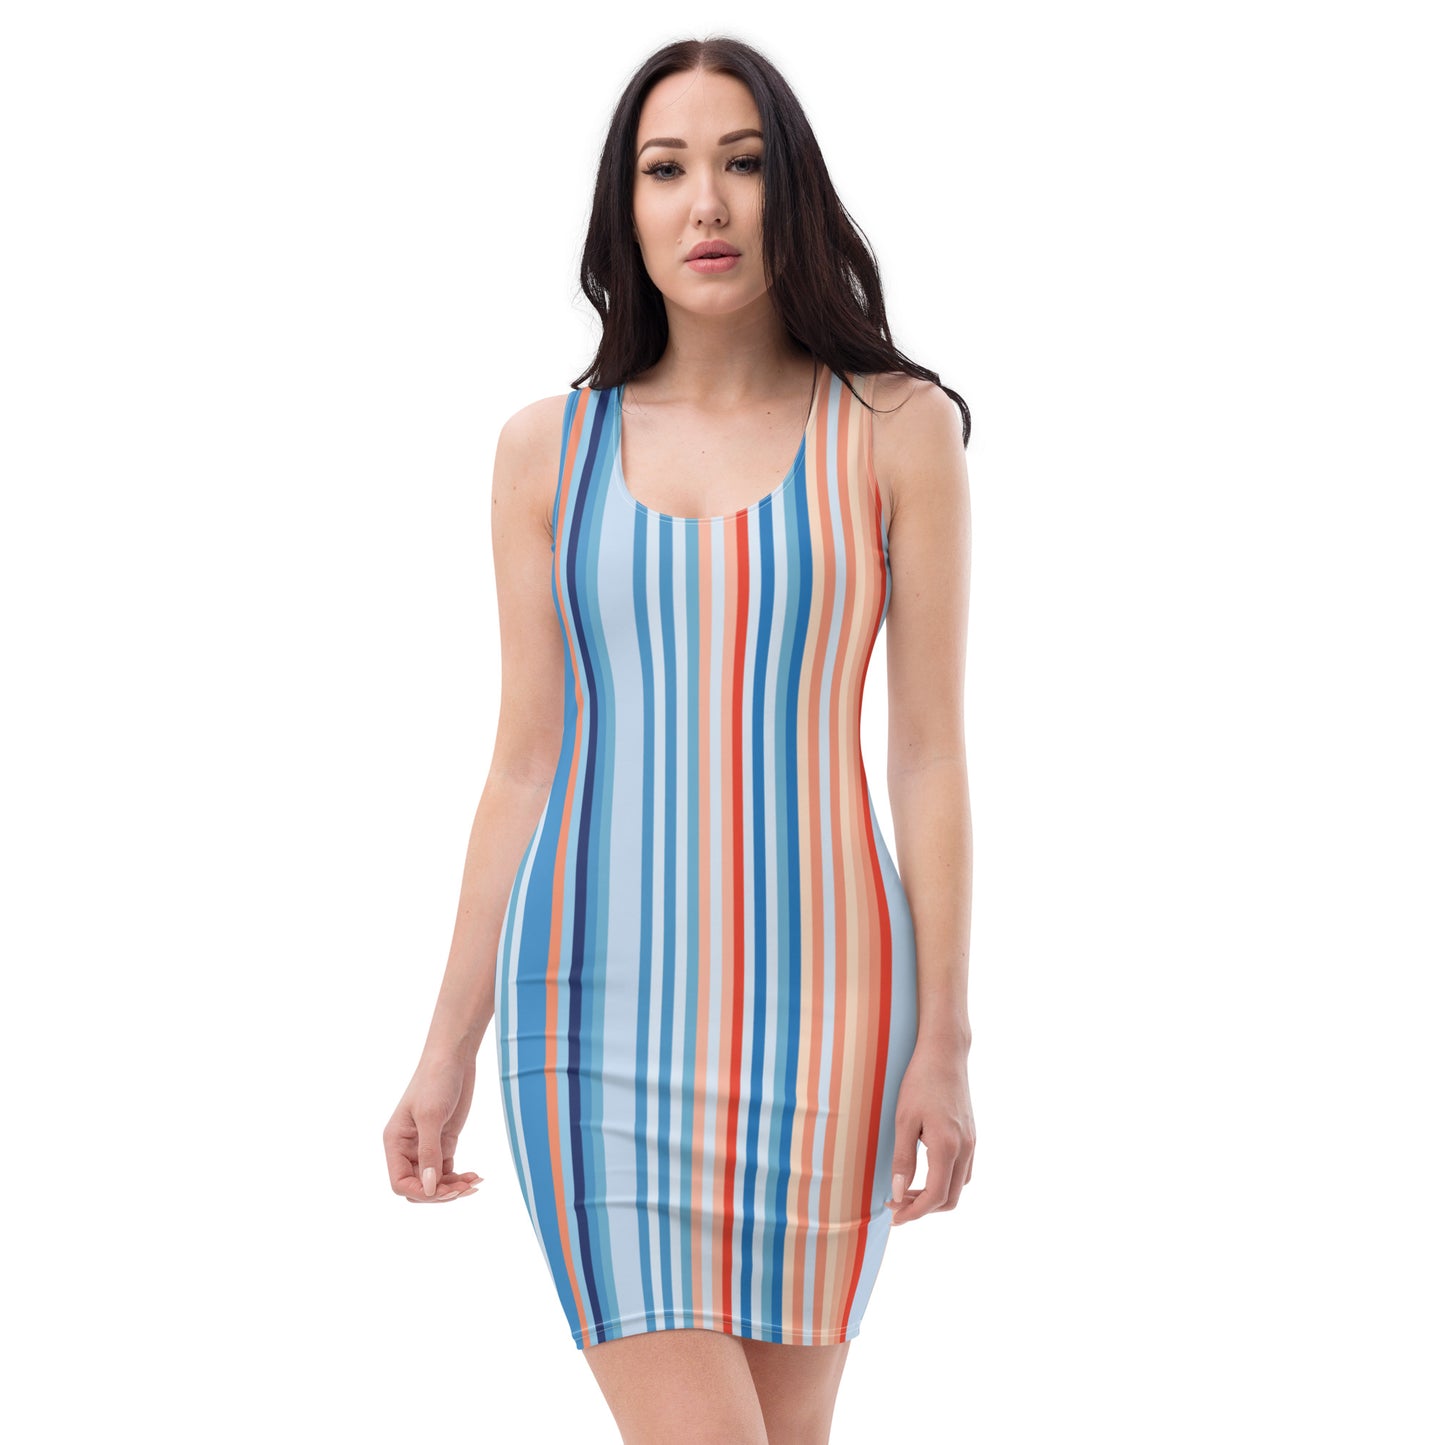 Climate Change Global Warming Stripes - Sustainably Made Dress Vertical